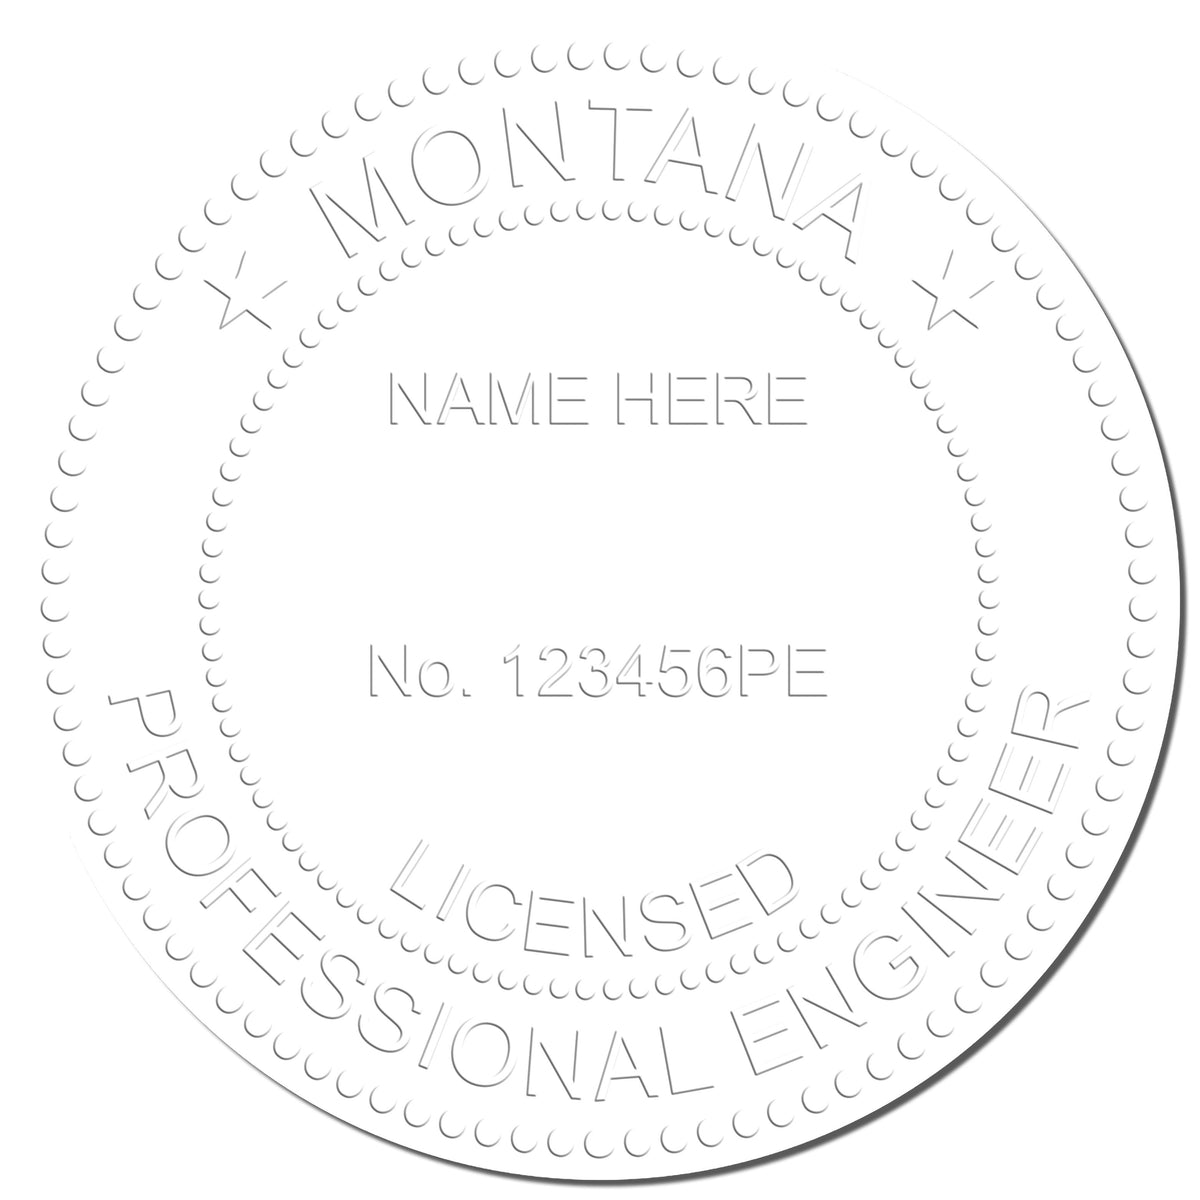 A photograph of the Handheld Montana Professional Engineer Embosser stamp impression reveals a vivid, professional image of the on paper.